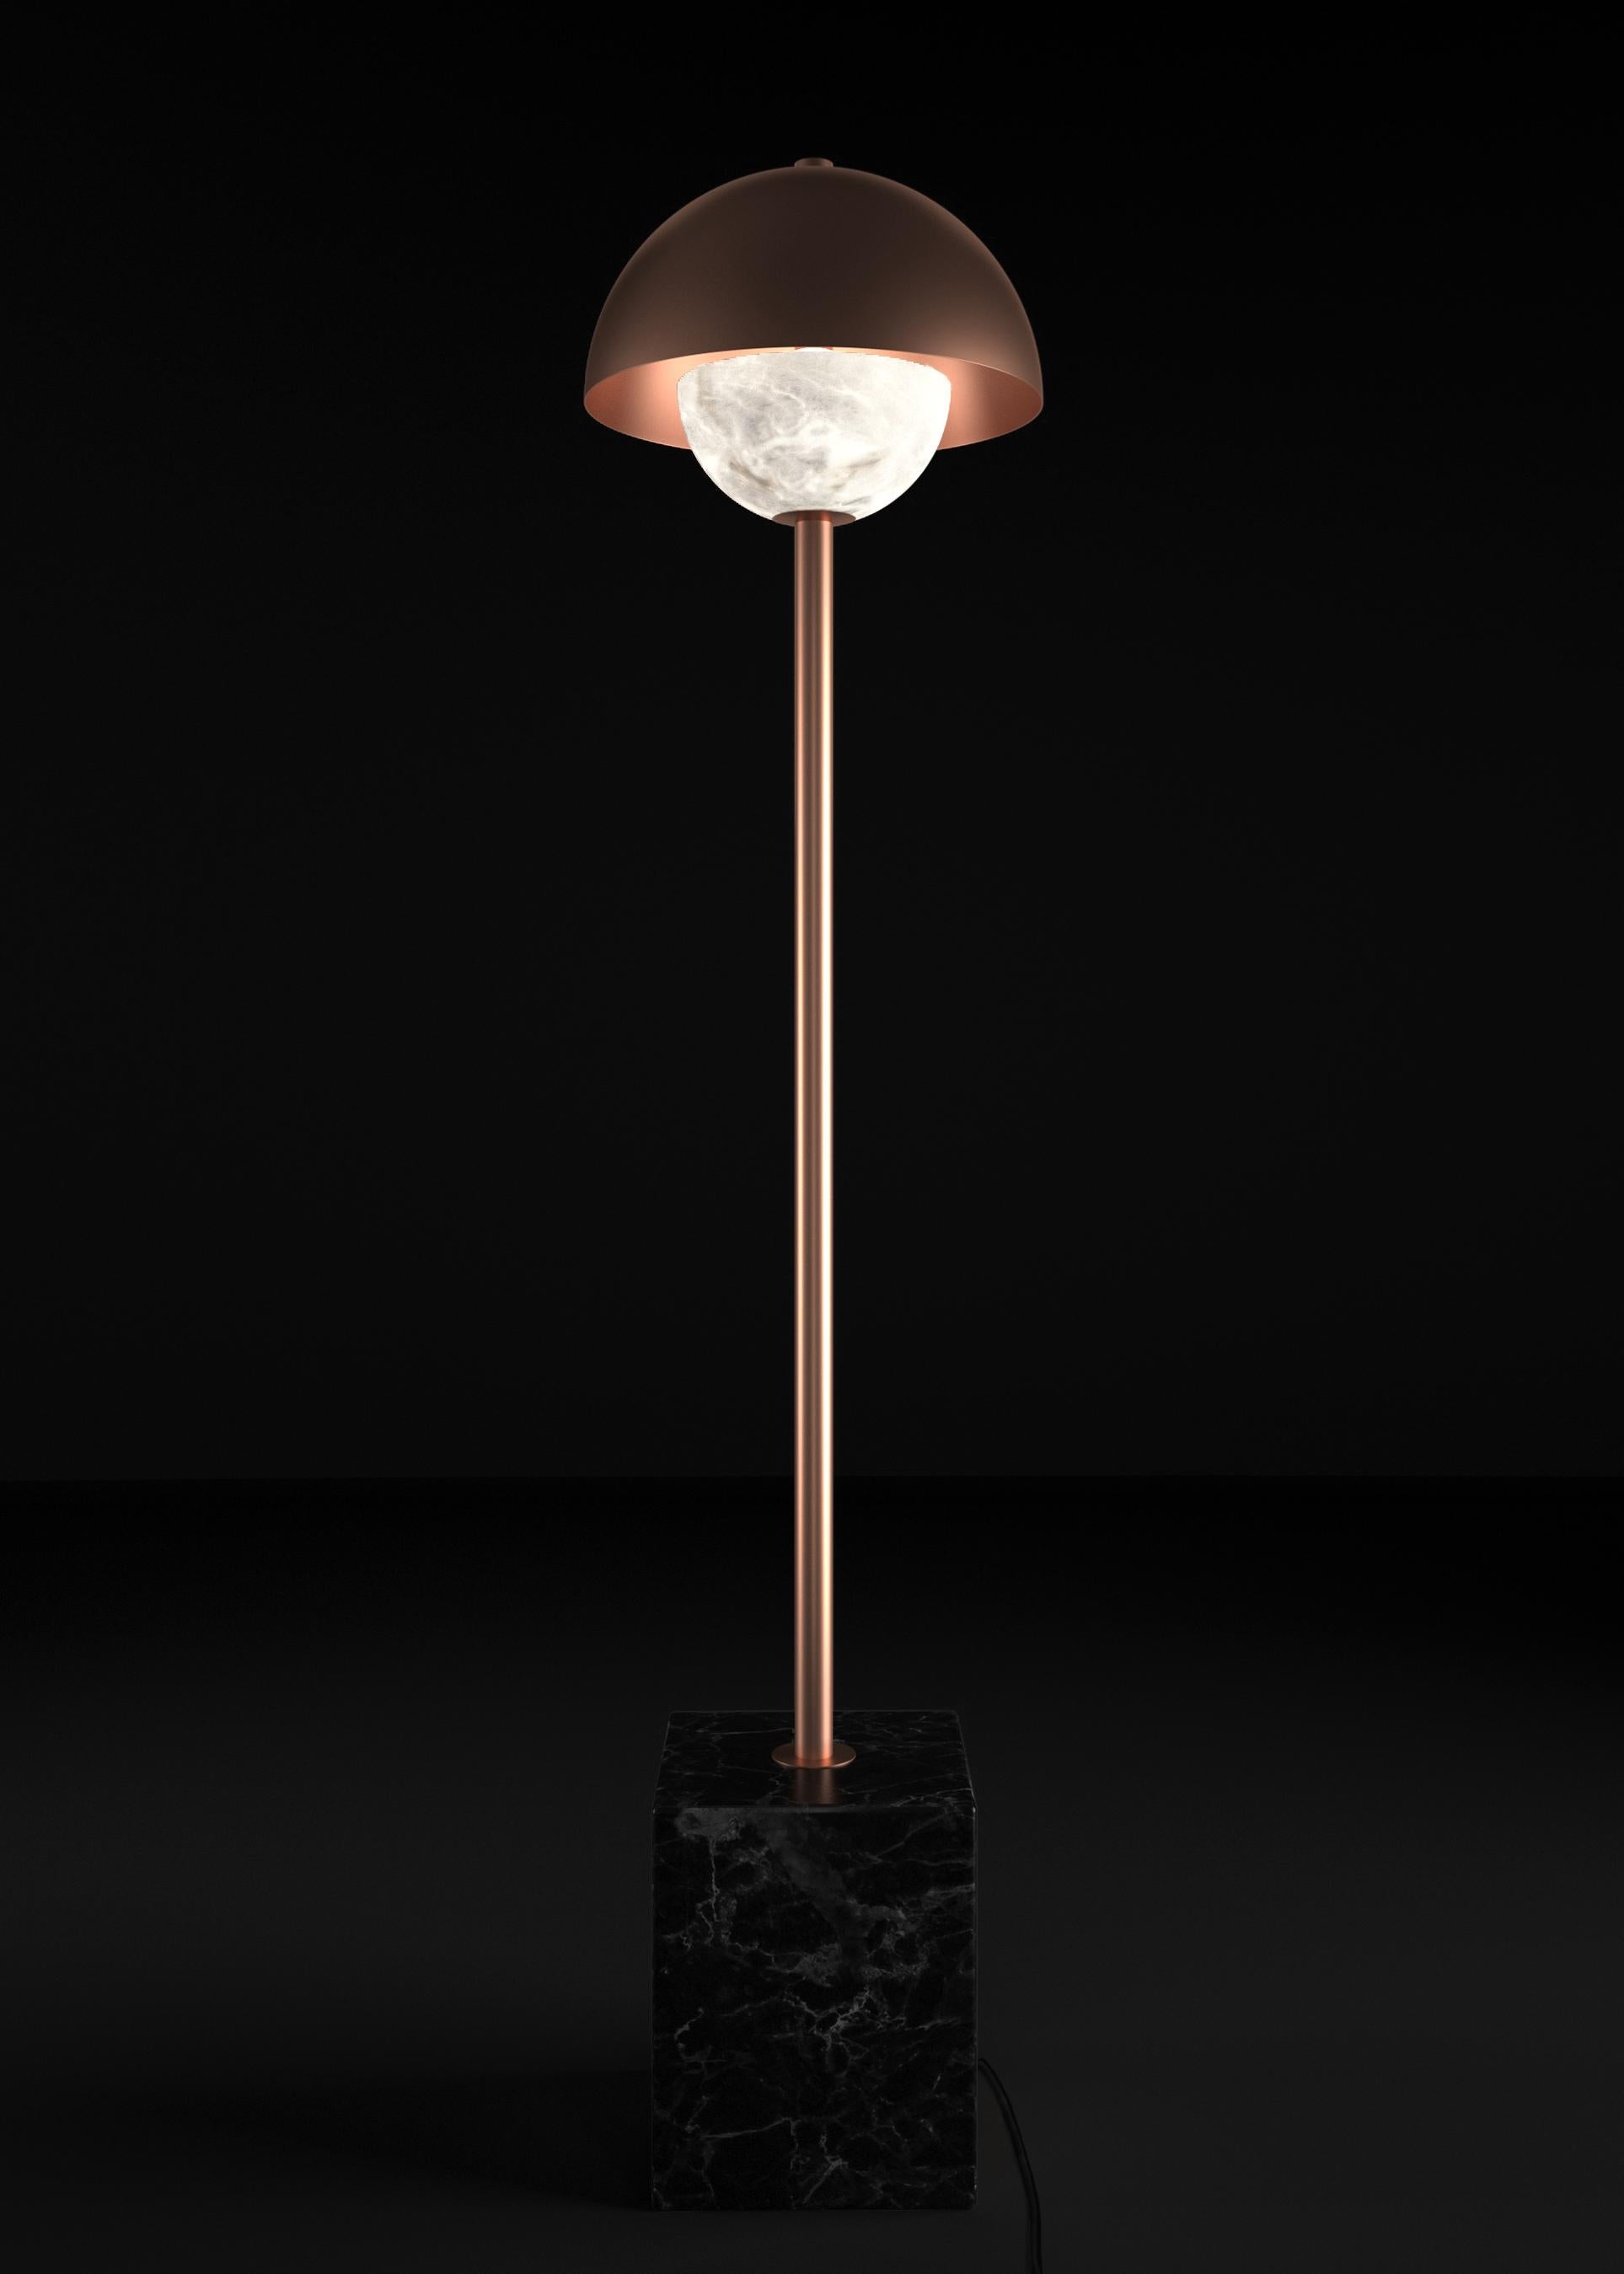 Apollo Copper Floor Lamp by Alabastro Italiano
Dimensions: D 30 x W 30 x H 130 cm.
Materials: White alabaster, Nero Marquinia marble, black silk cables and copper.

Available in different finishes: Shiny Silver, Bronze, Brushed Brass, Ruggine of